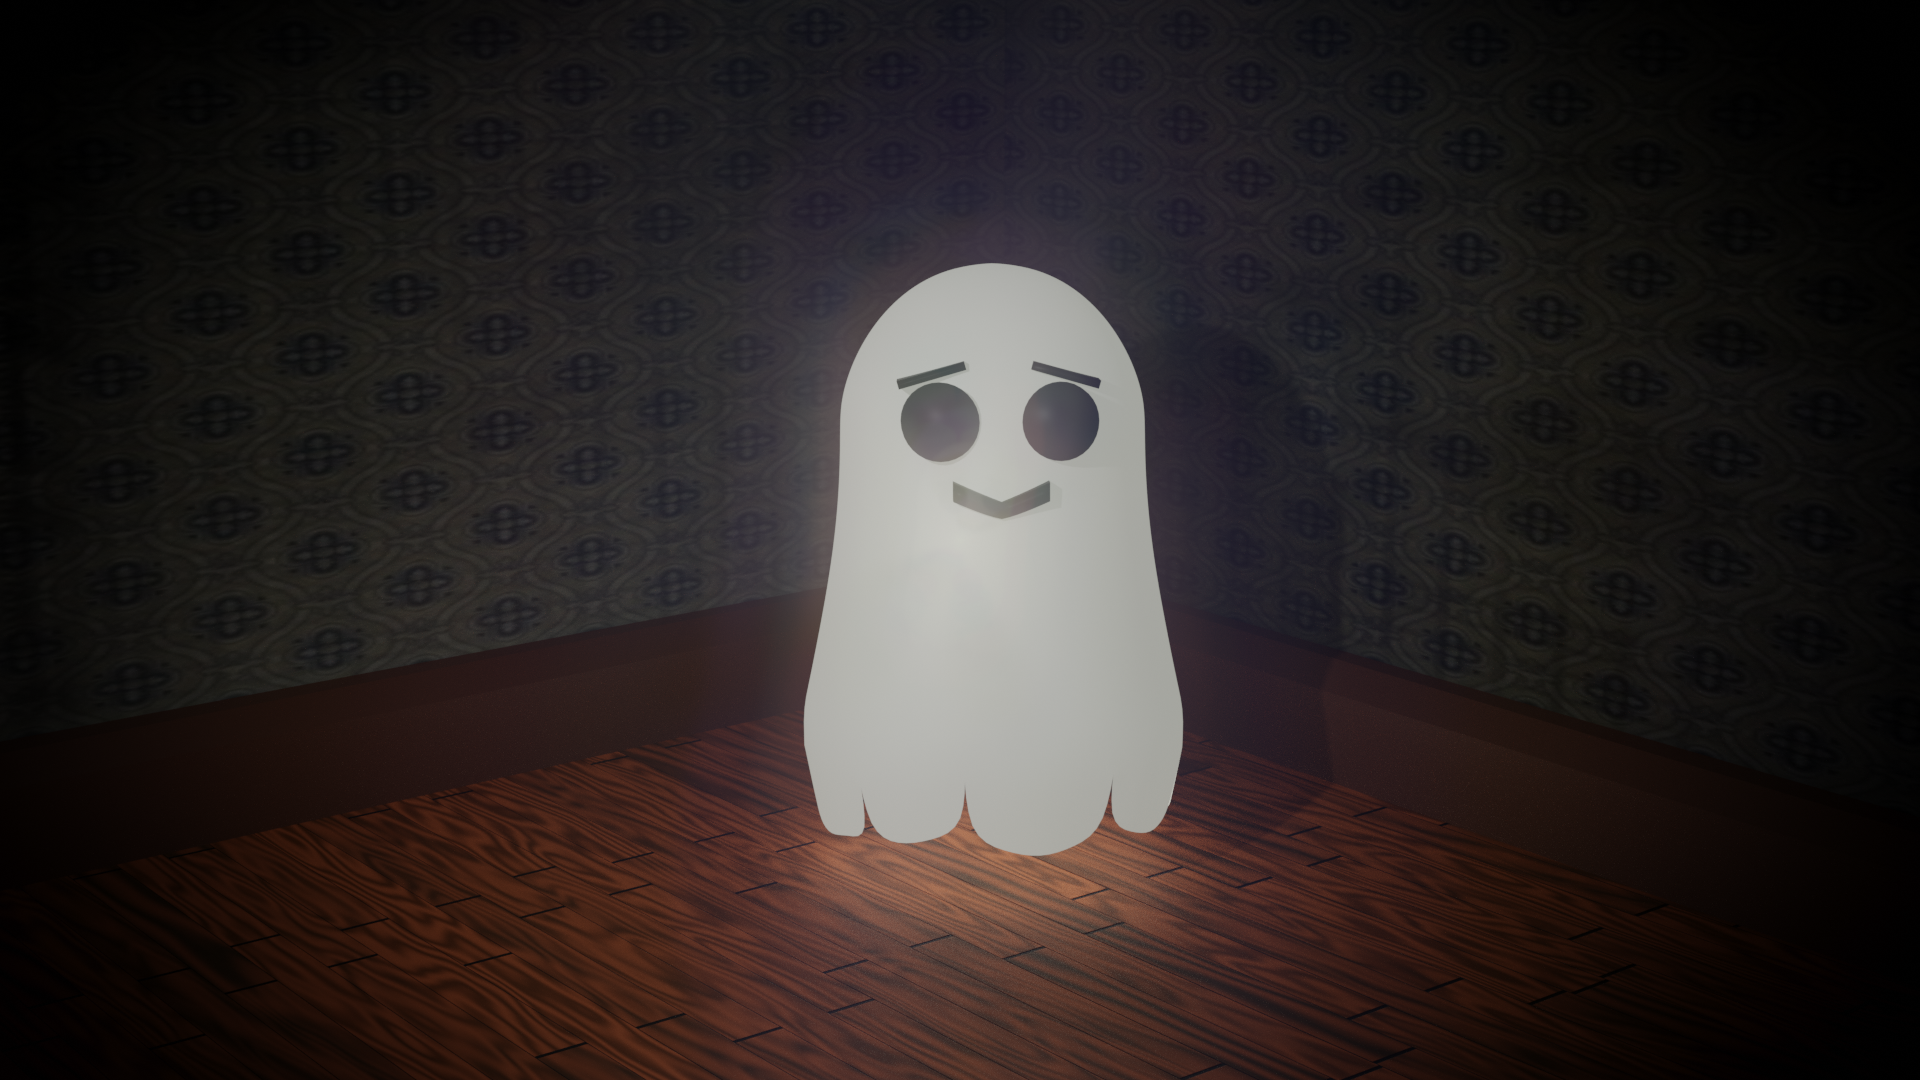 Klevin the Cowardly Ghost